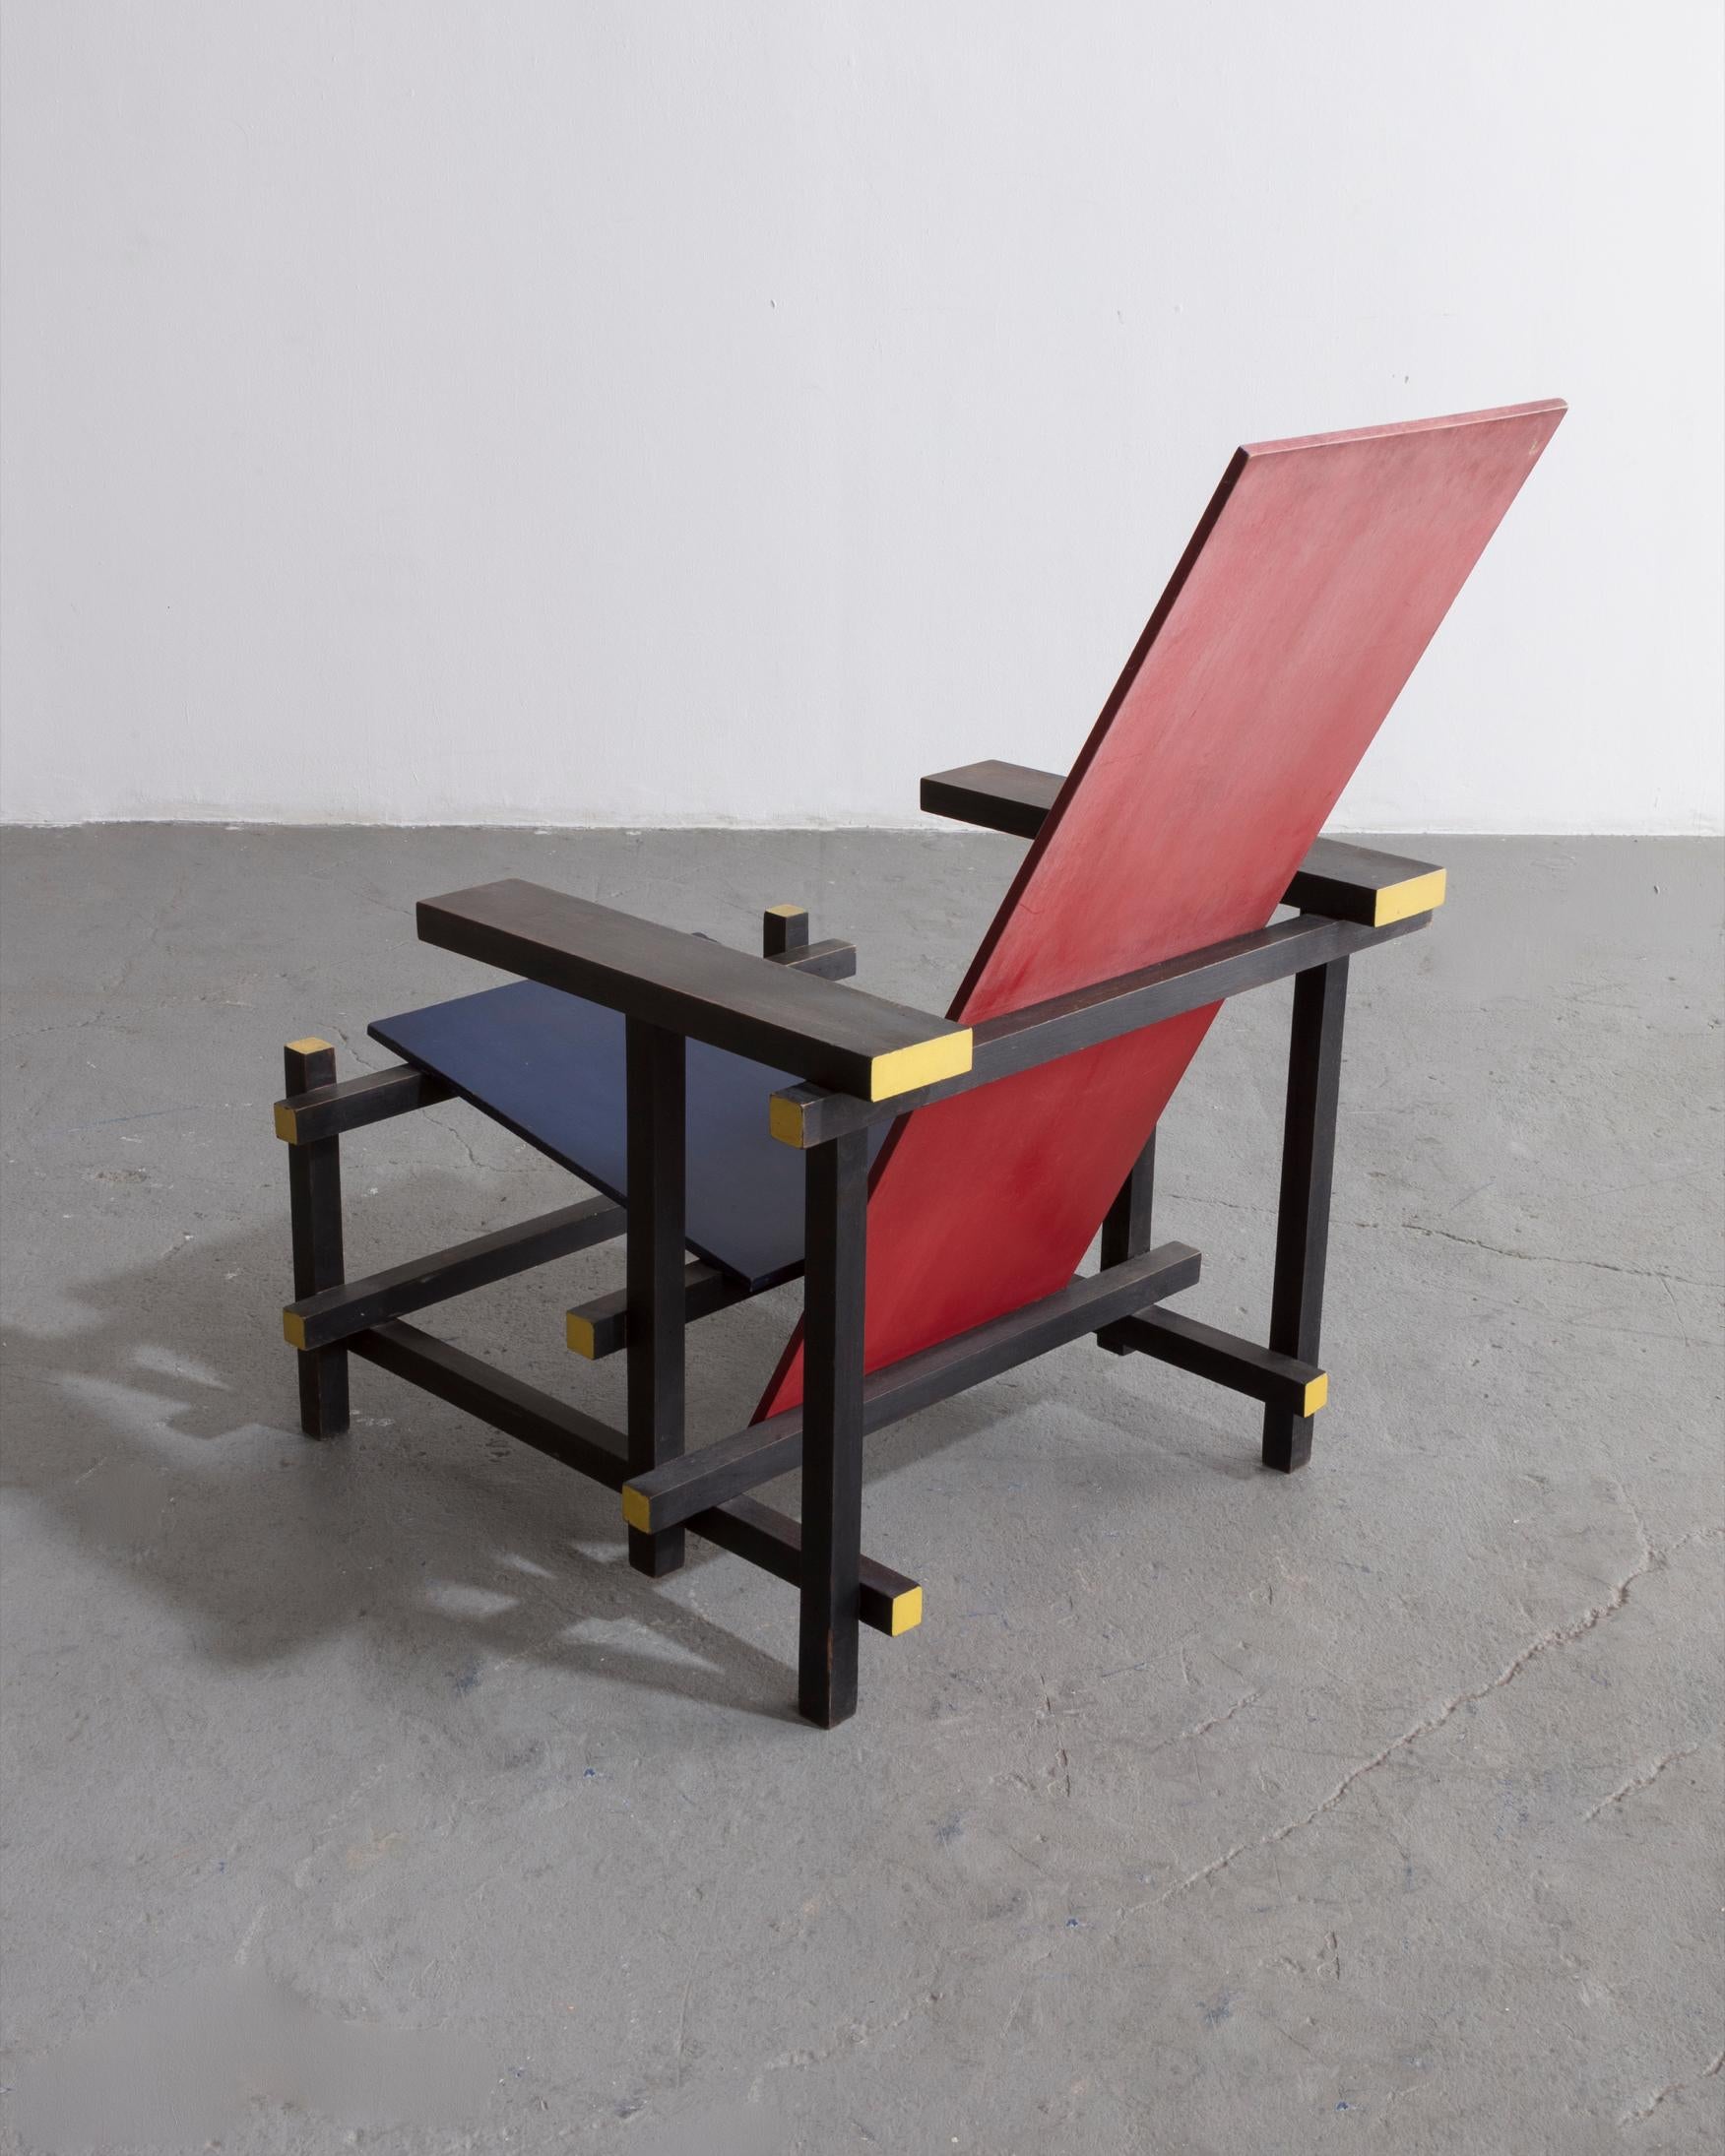 Red blue chair. Designed by Gerrit Rietveld, 1919. This example made circa 1950 by Gerard van de Groenekan. Cabinetmakers paper label on rail beneath the seat.